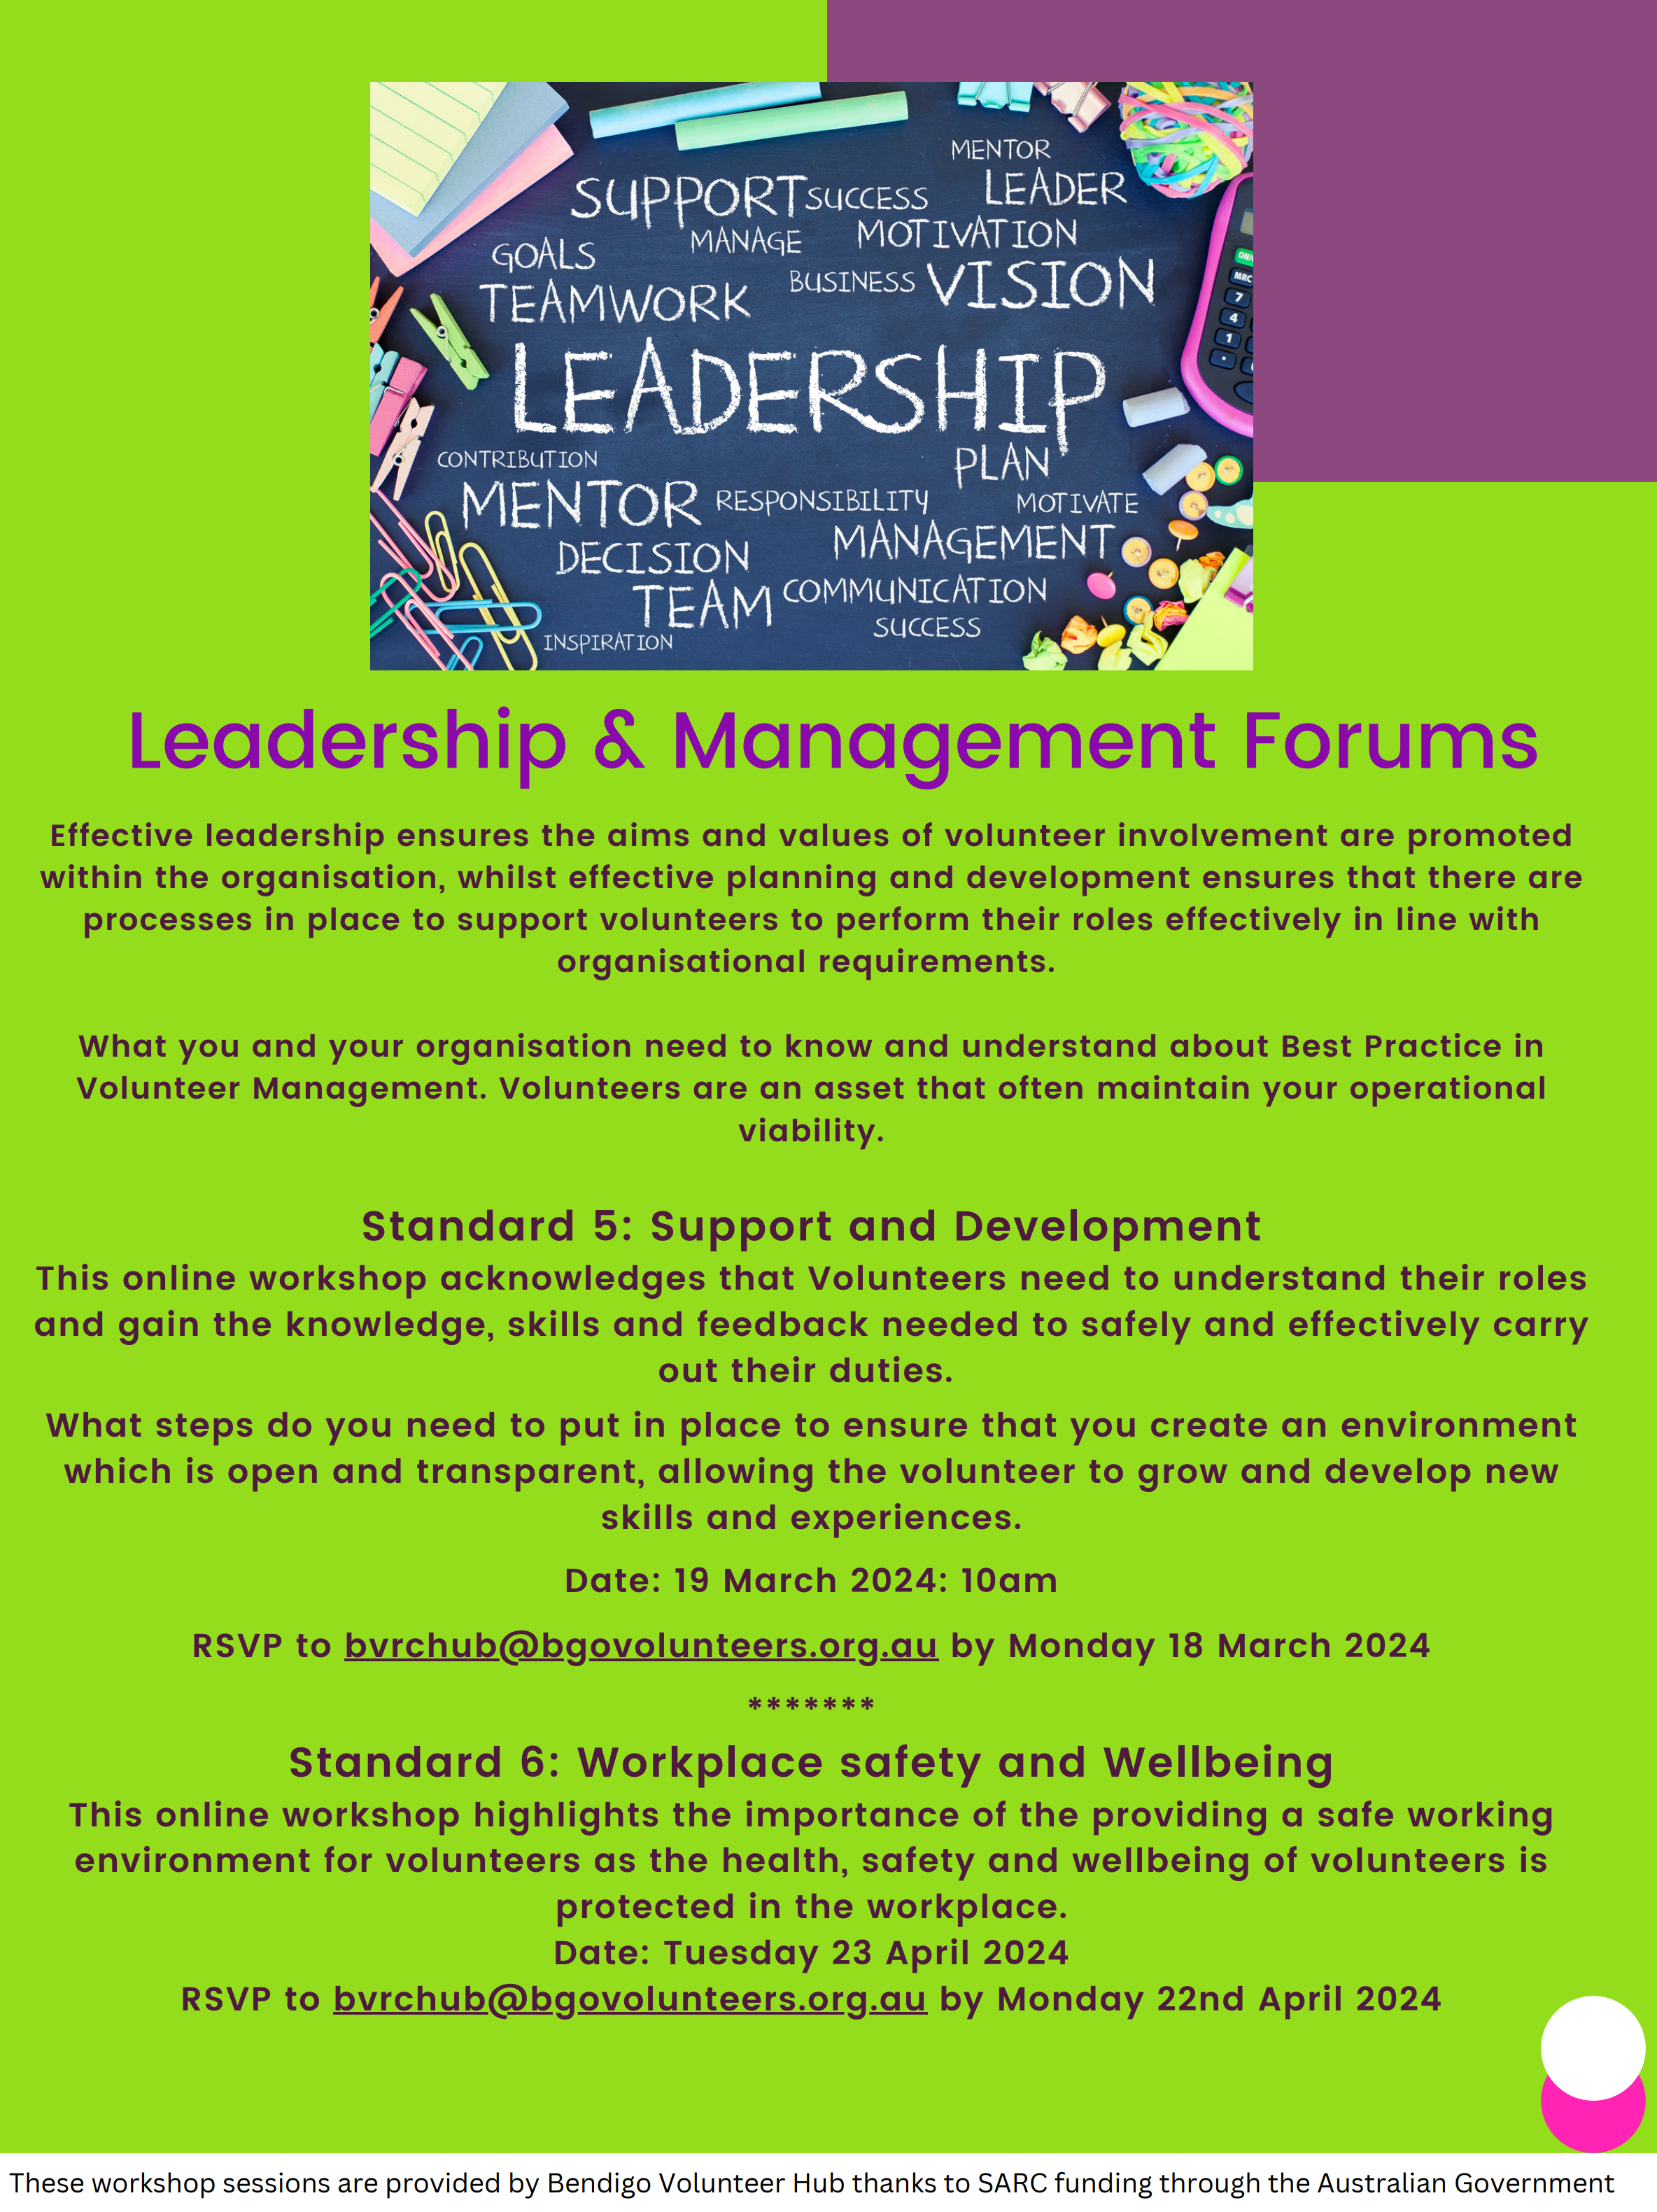 Leadership and Management Forum flyer